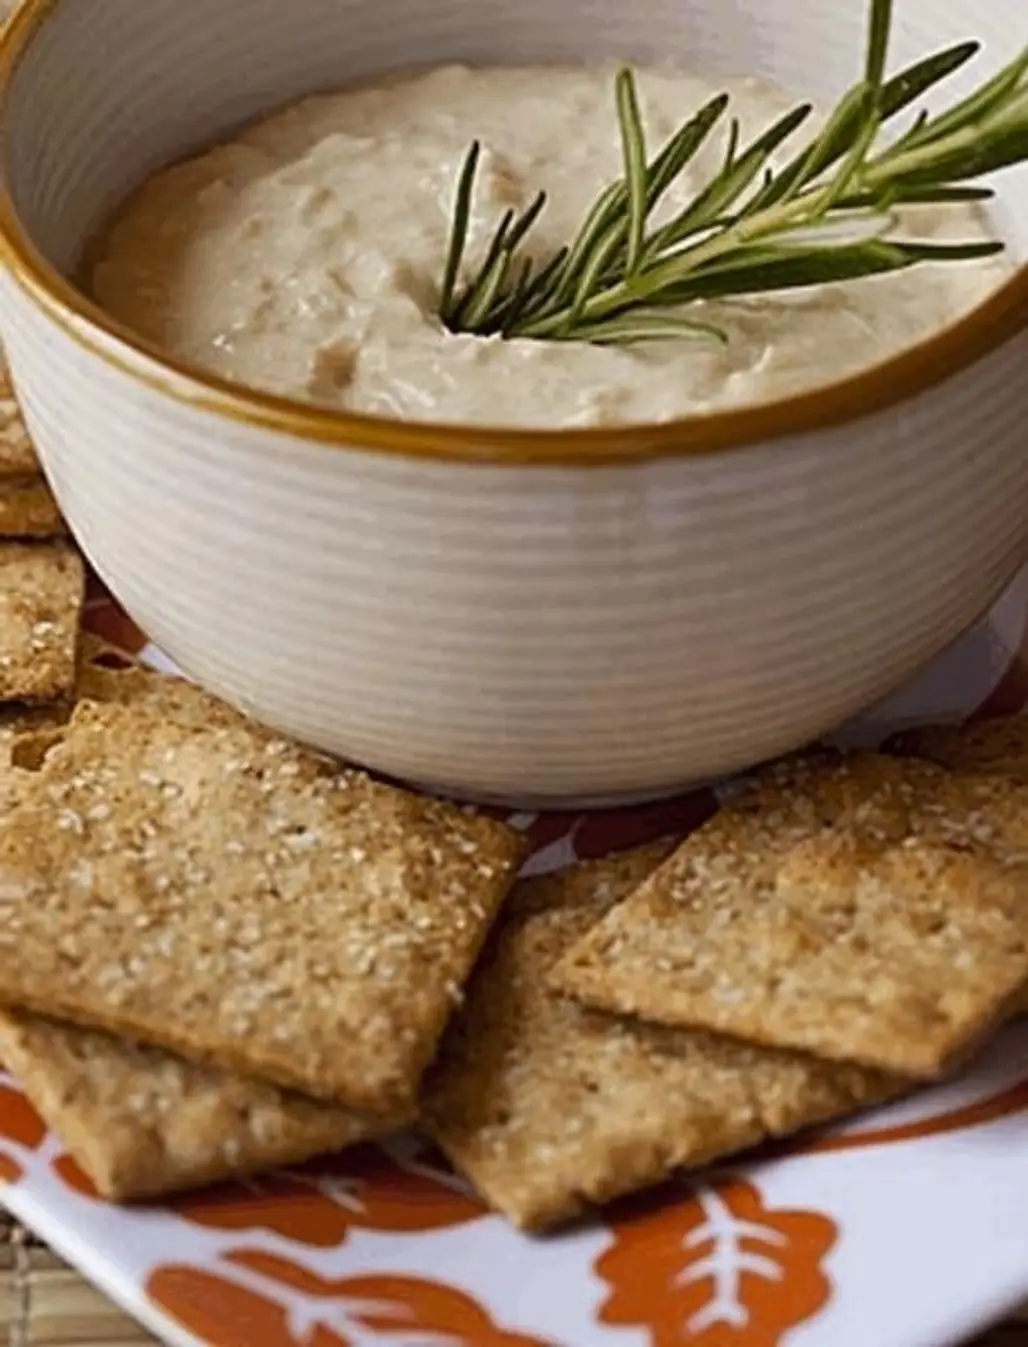 Whole Grain Crackers with Hummus